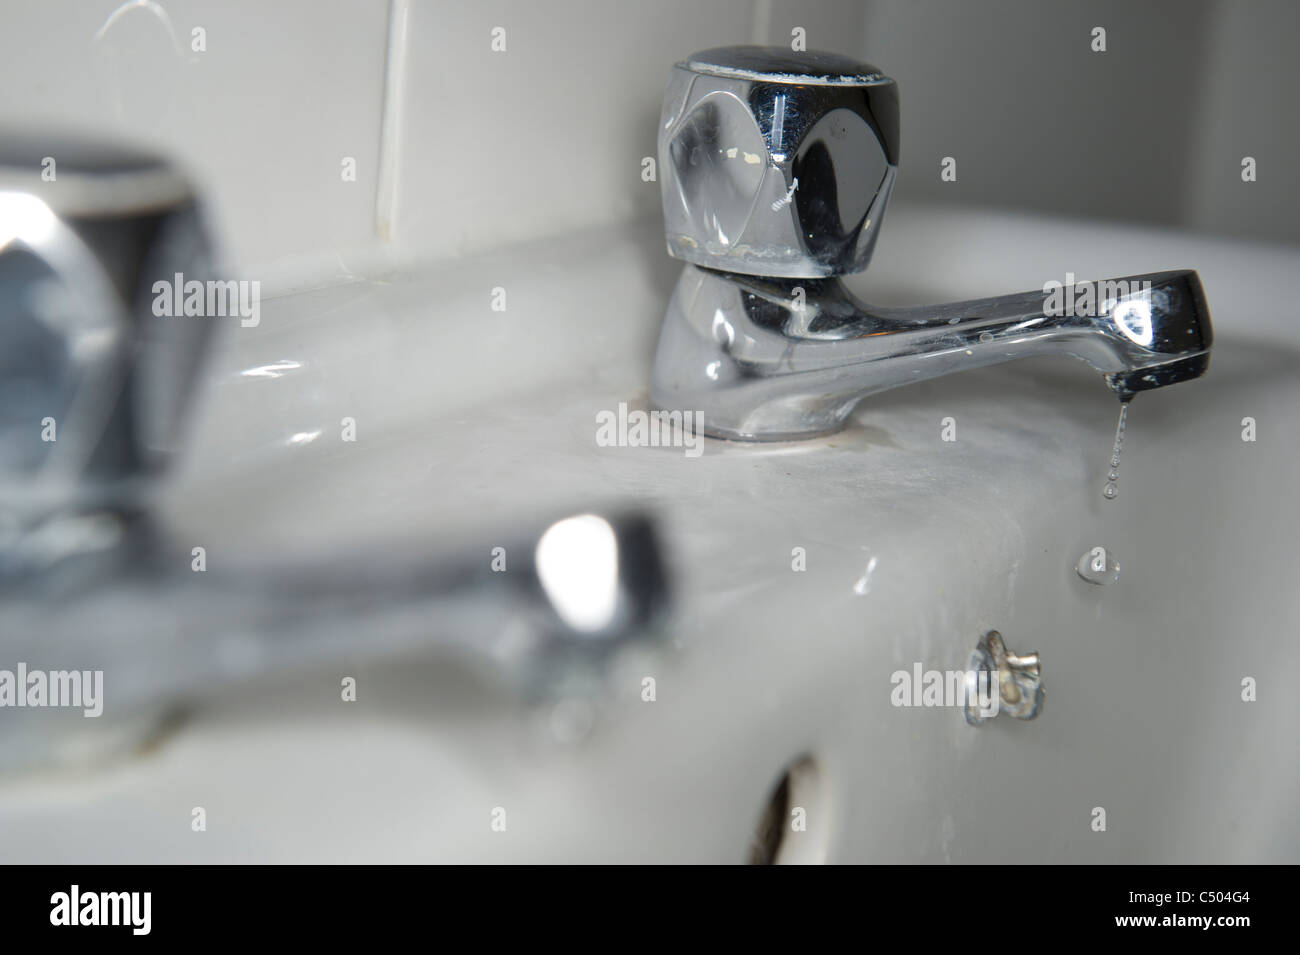 leaking dripping tap 'water wastage' Stock Photo